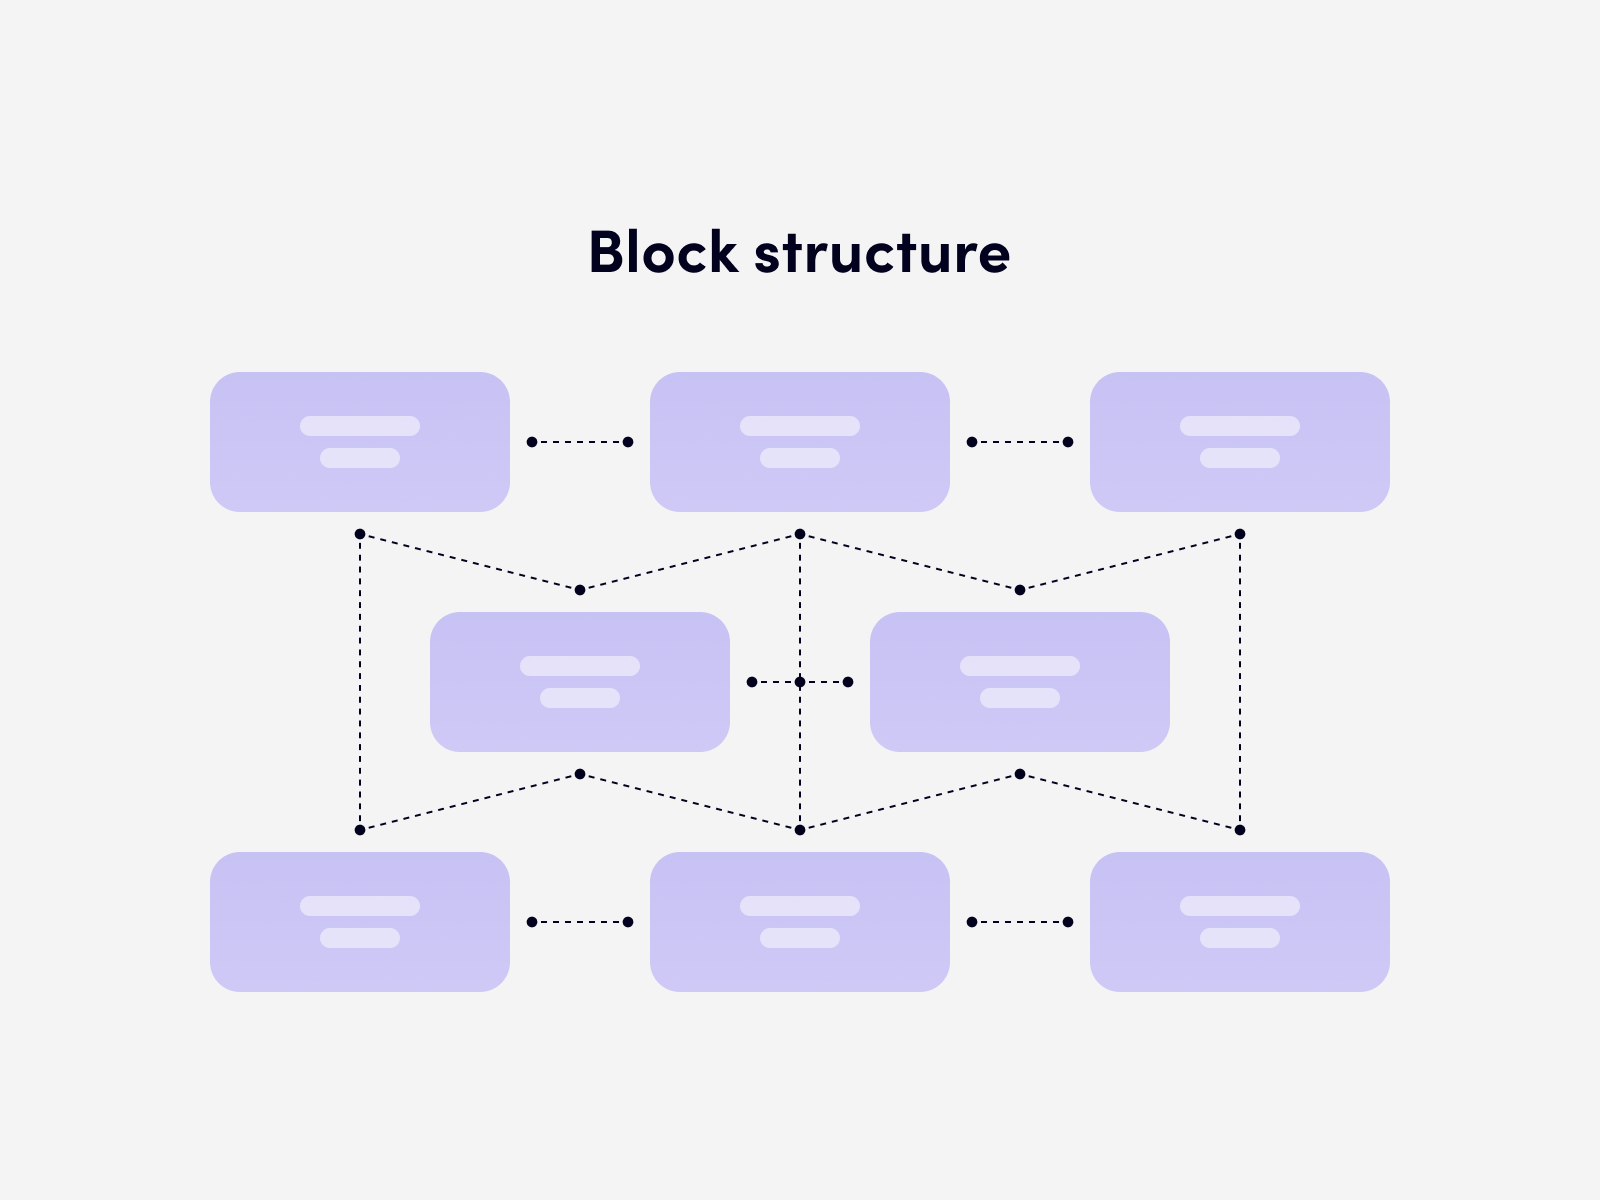 Block structure is suitable only for sites where all pages are linked together